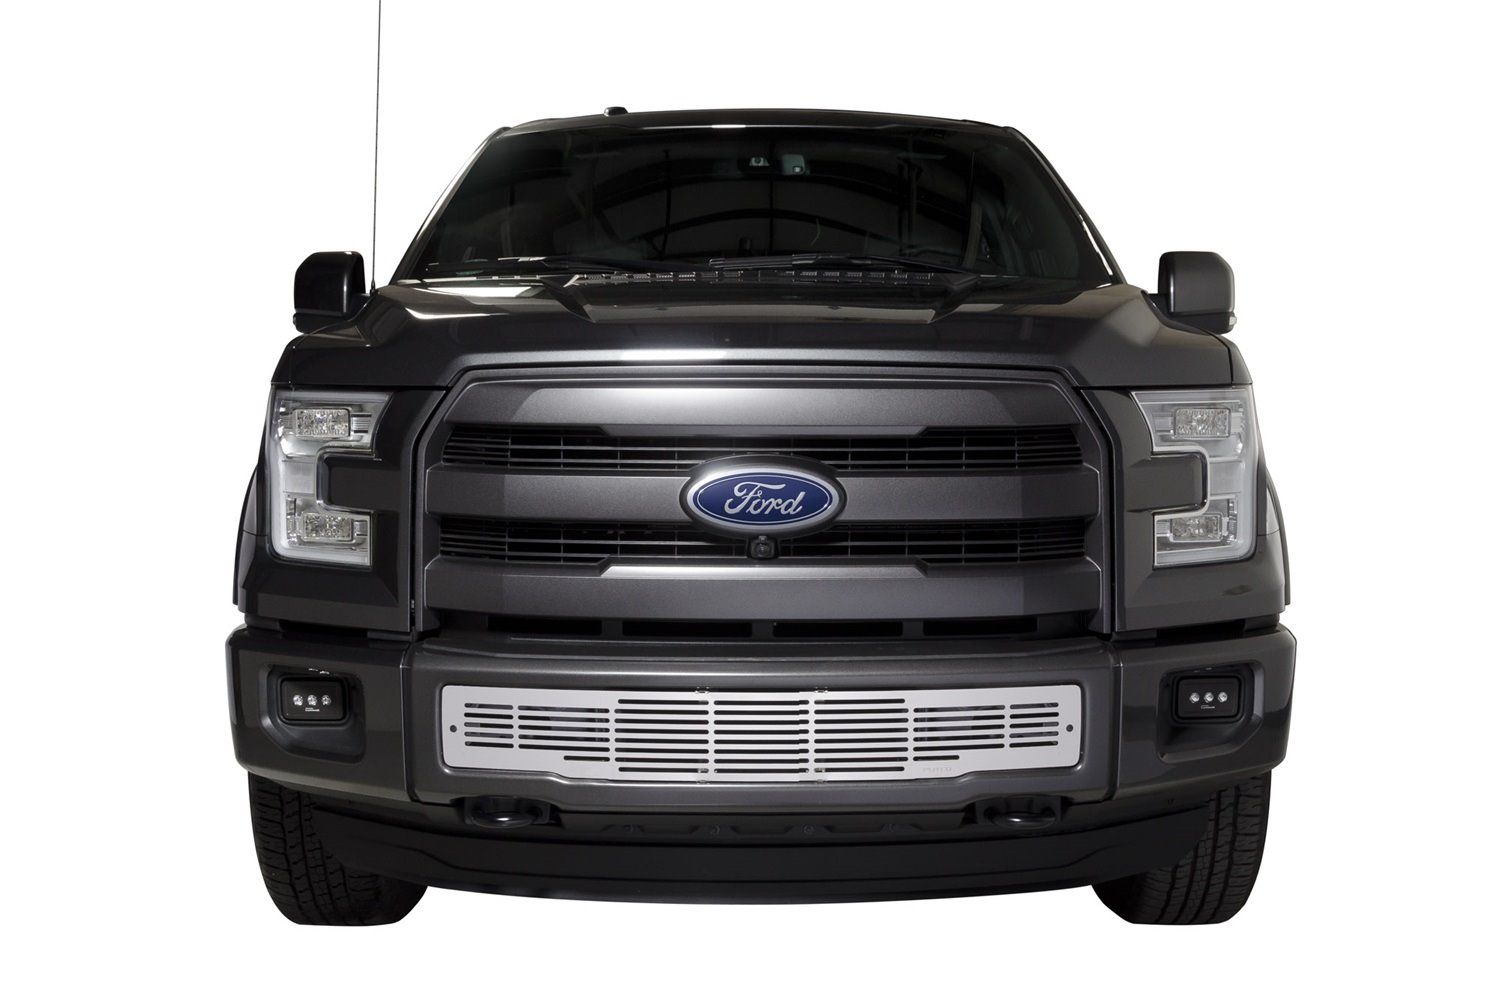 GRILLE Punch GRILLE Ford F150-Stainless Steel Bar Design